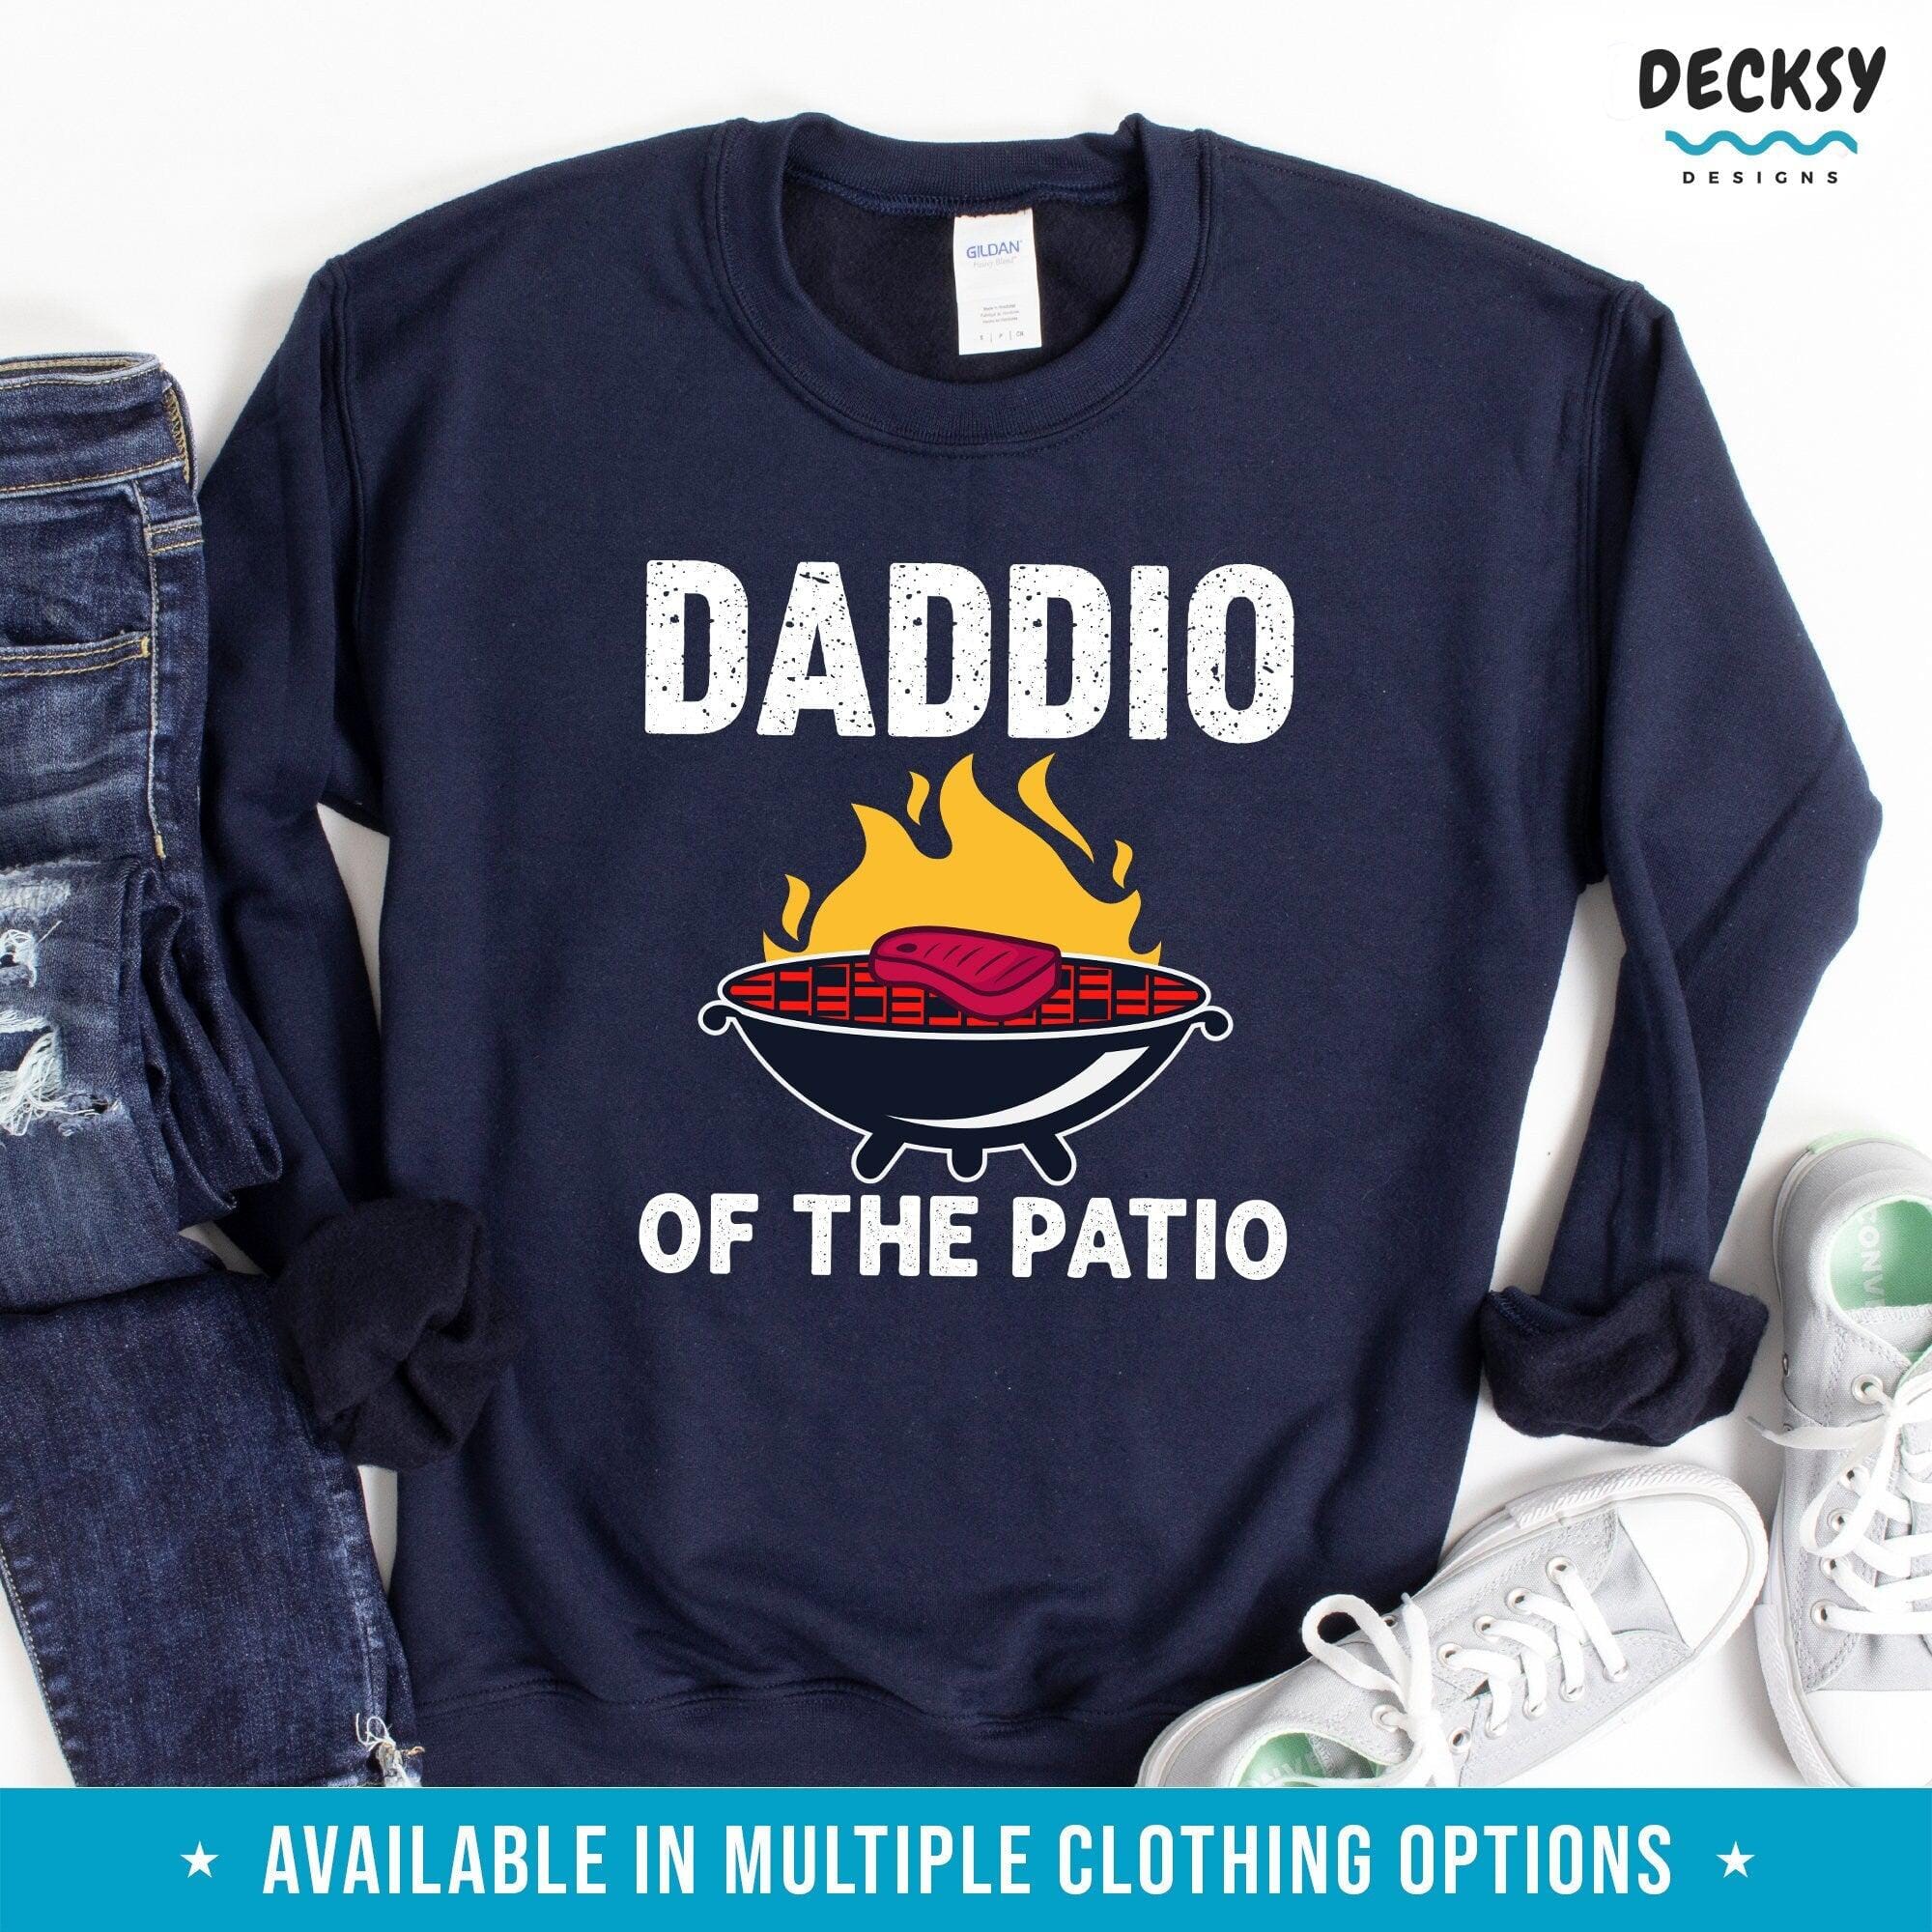 Bbq Dad Shirt, Barbecue Gifts Men-Clothing:Gender-Neutral Adult Clothing:Tops & Tees:T-shirts:Graphic Tees-DecksyDesigns